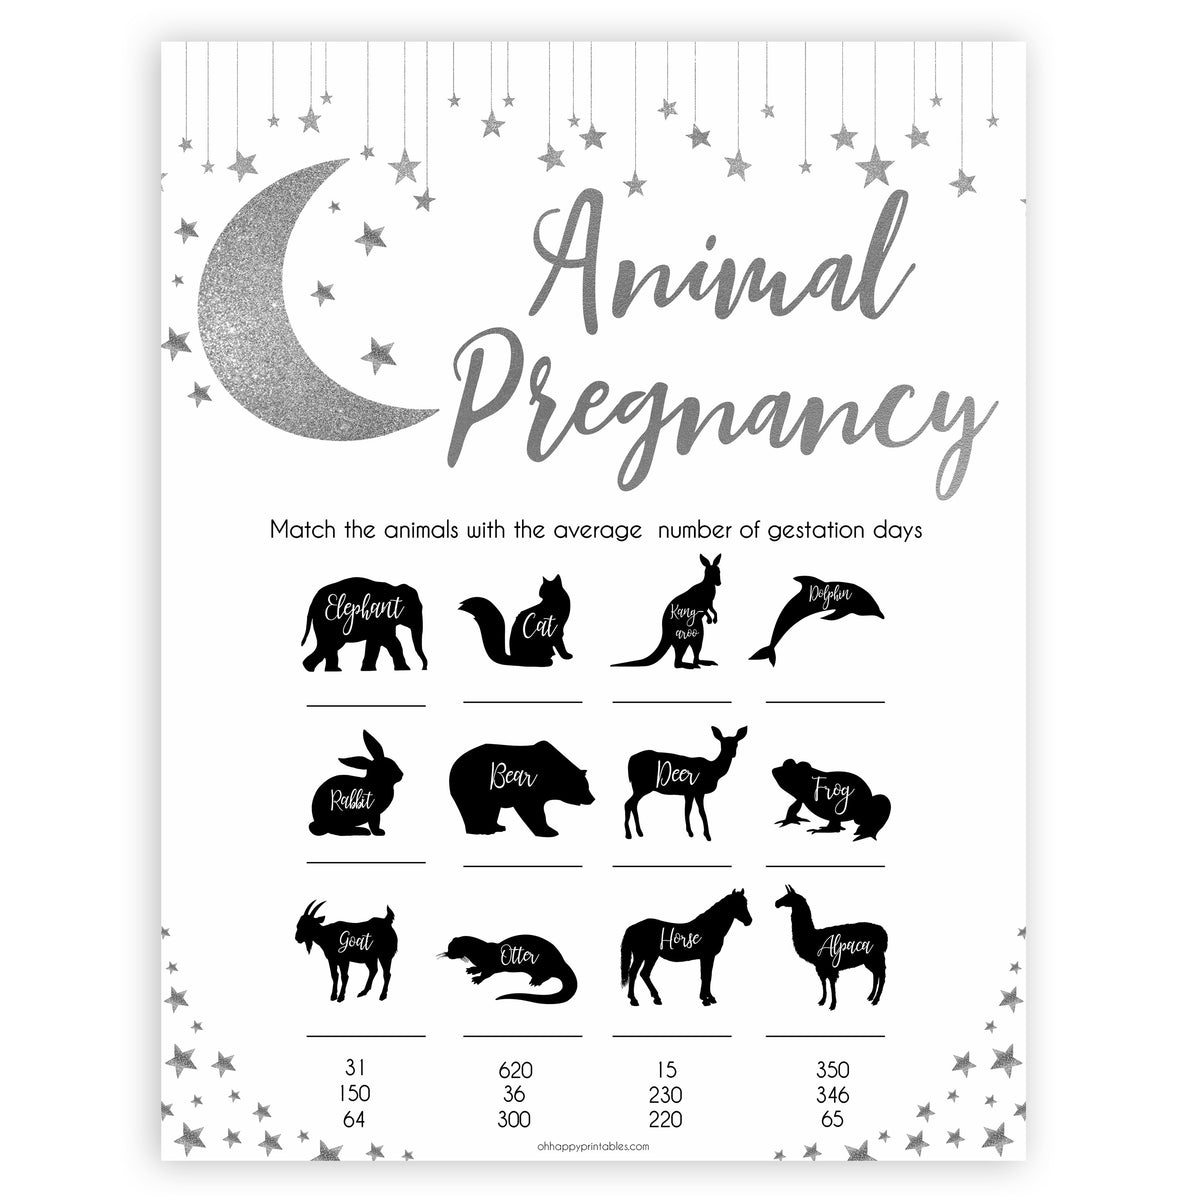 Silver little star, animal pregnancy baby games, baby shower games, printable baby games, fun baby games, twinkle little star games, baby games, fun baby shower ideas, baby shower ideas